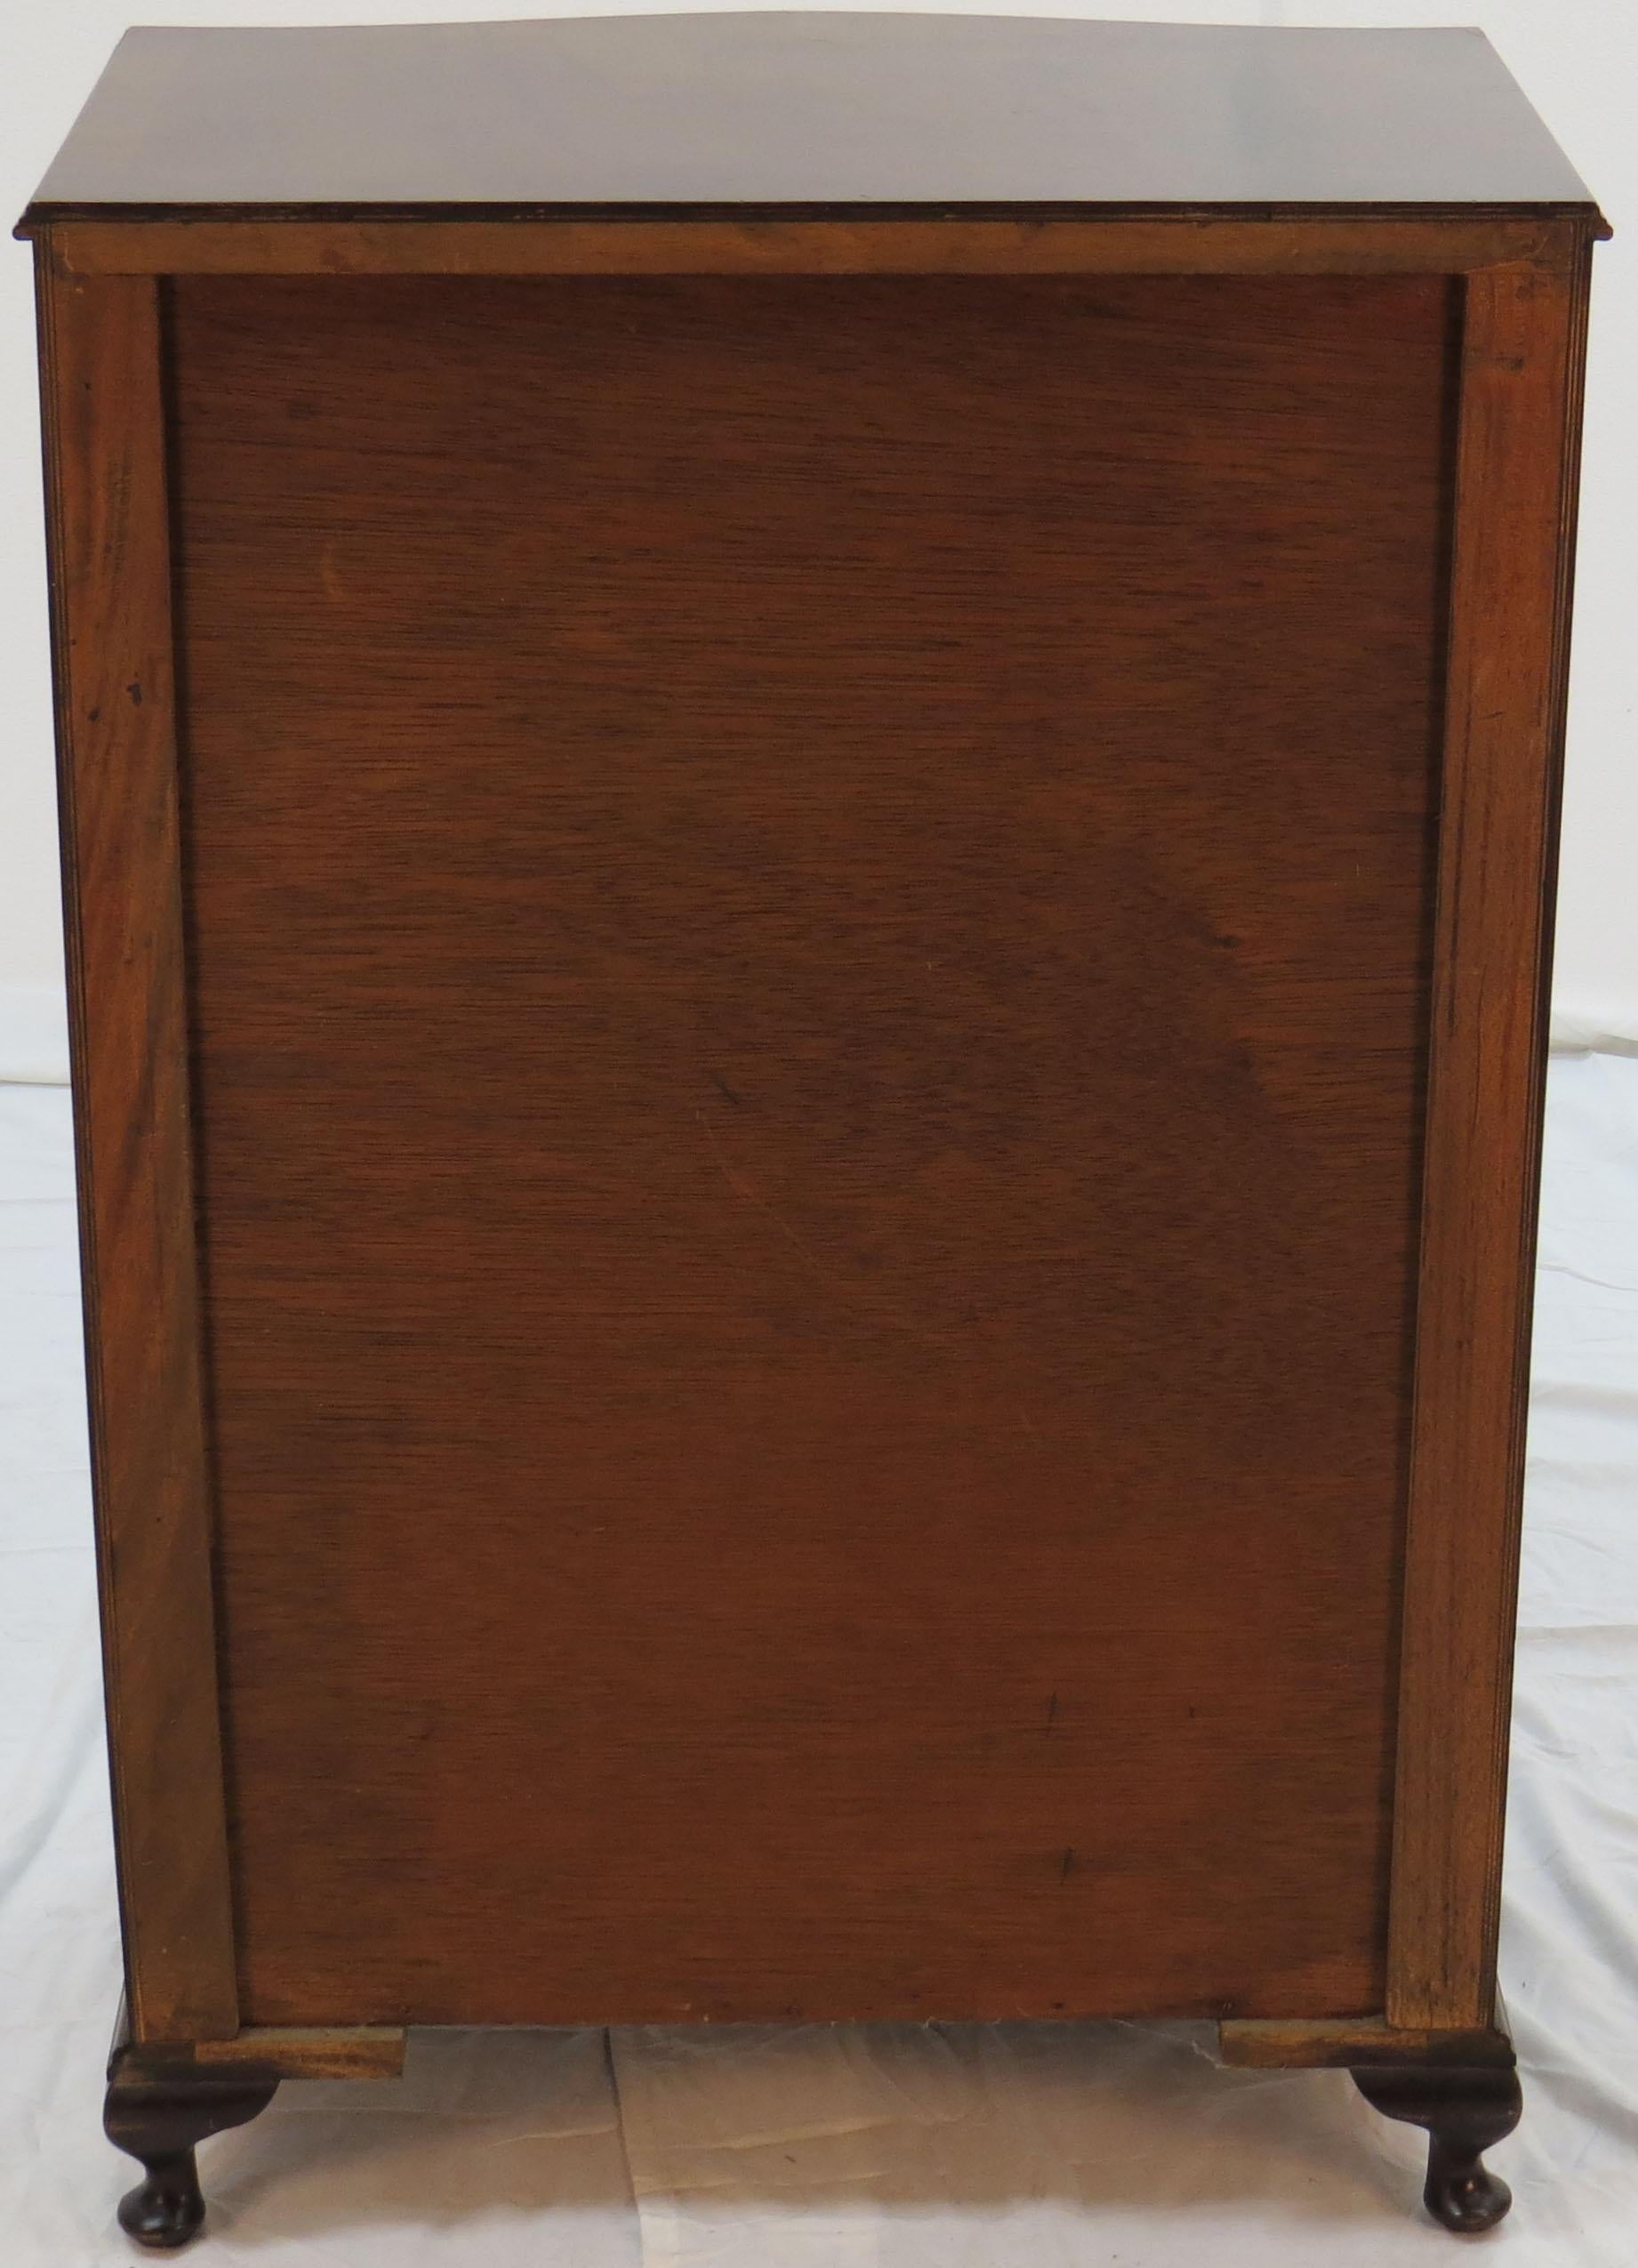 Walnut Bow Front Queen Anne Style Lingerie Chest of Drawers Dresser 1